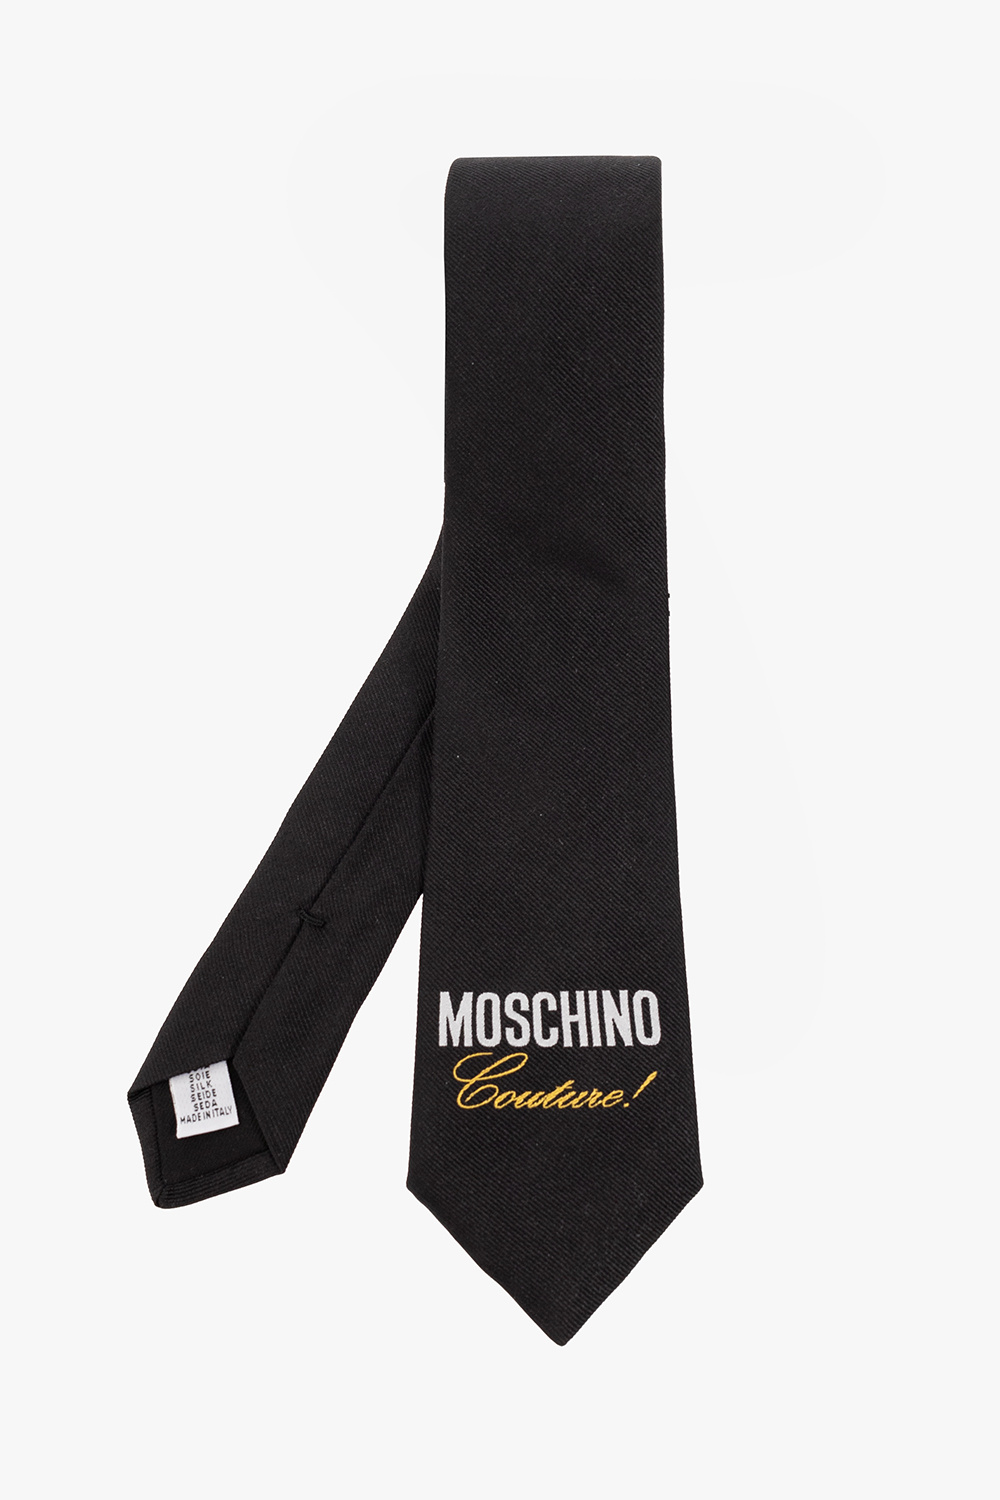 Moschino WHAT SHOES WILL WE WEAR THIS SEASON